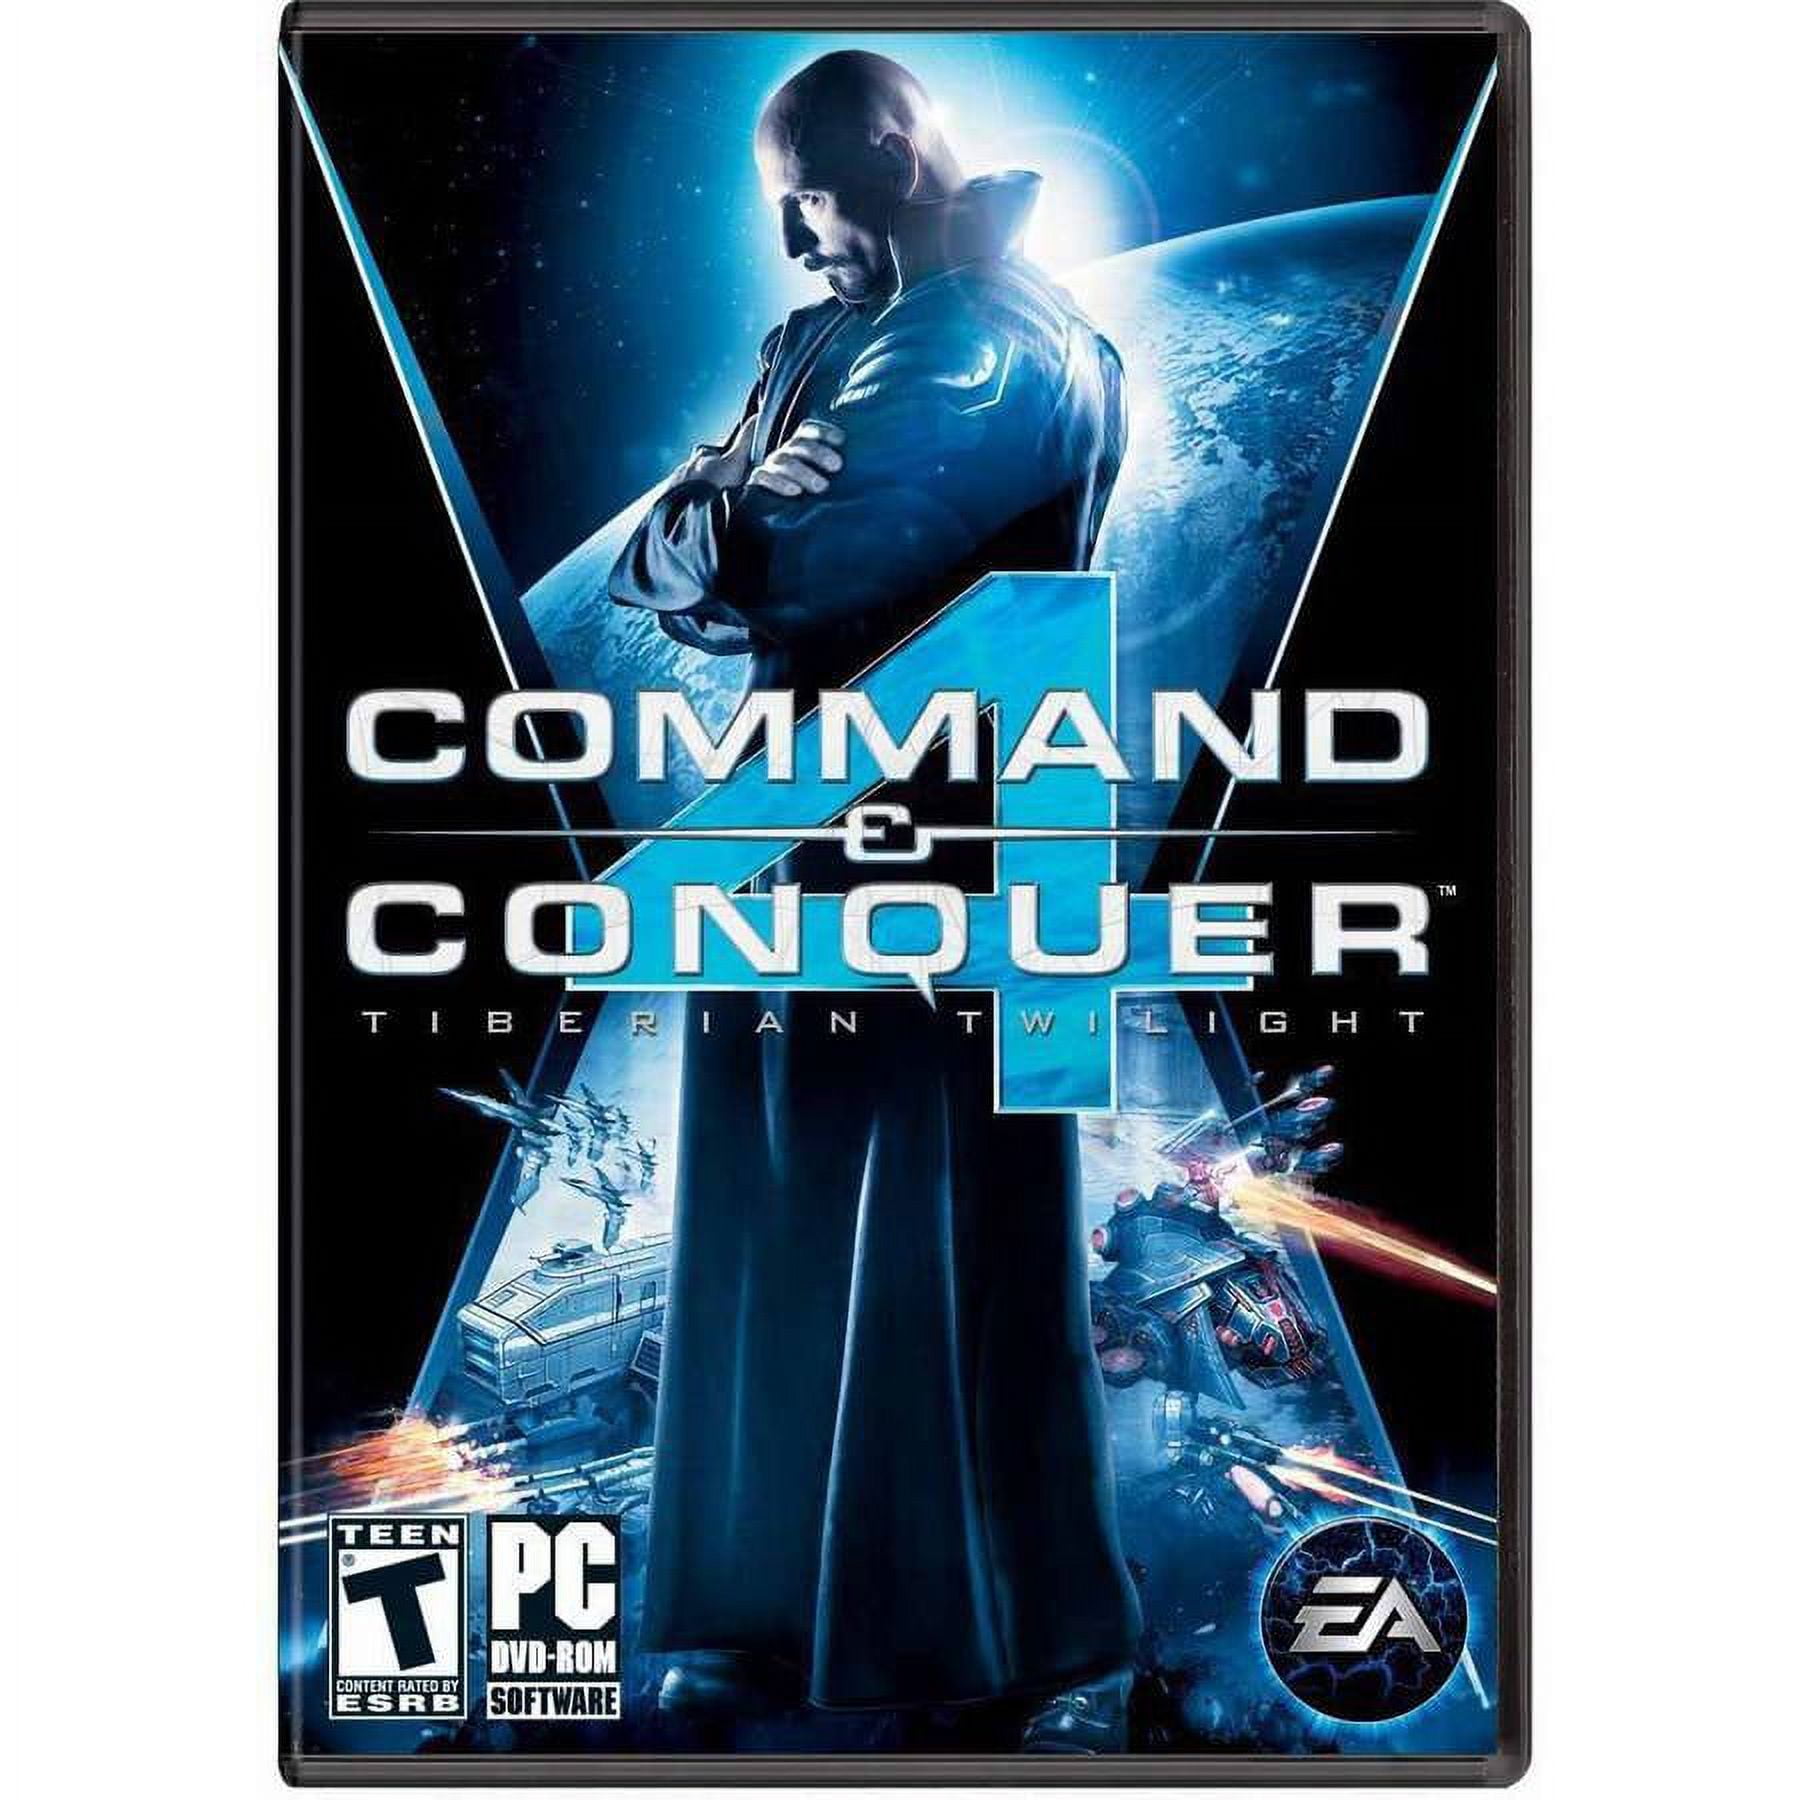 & (Digital Code) 4 Conquer Arts Command Electronic